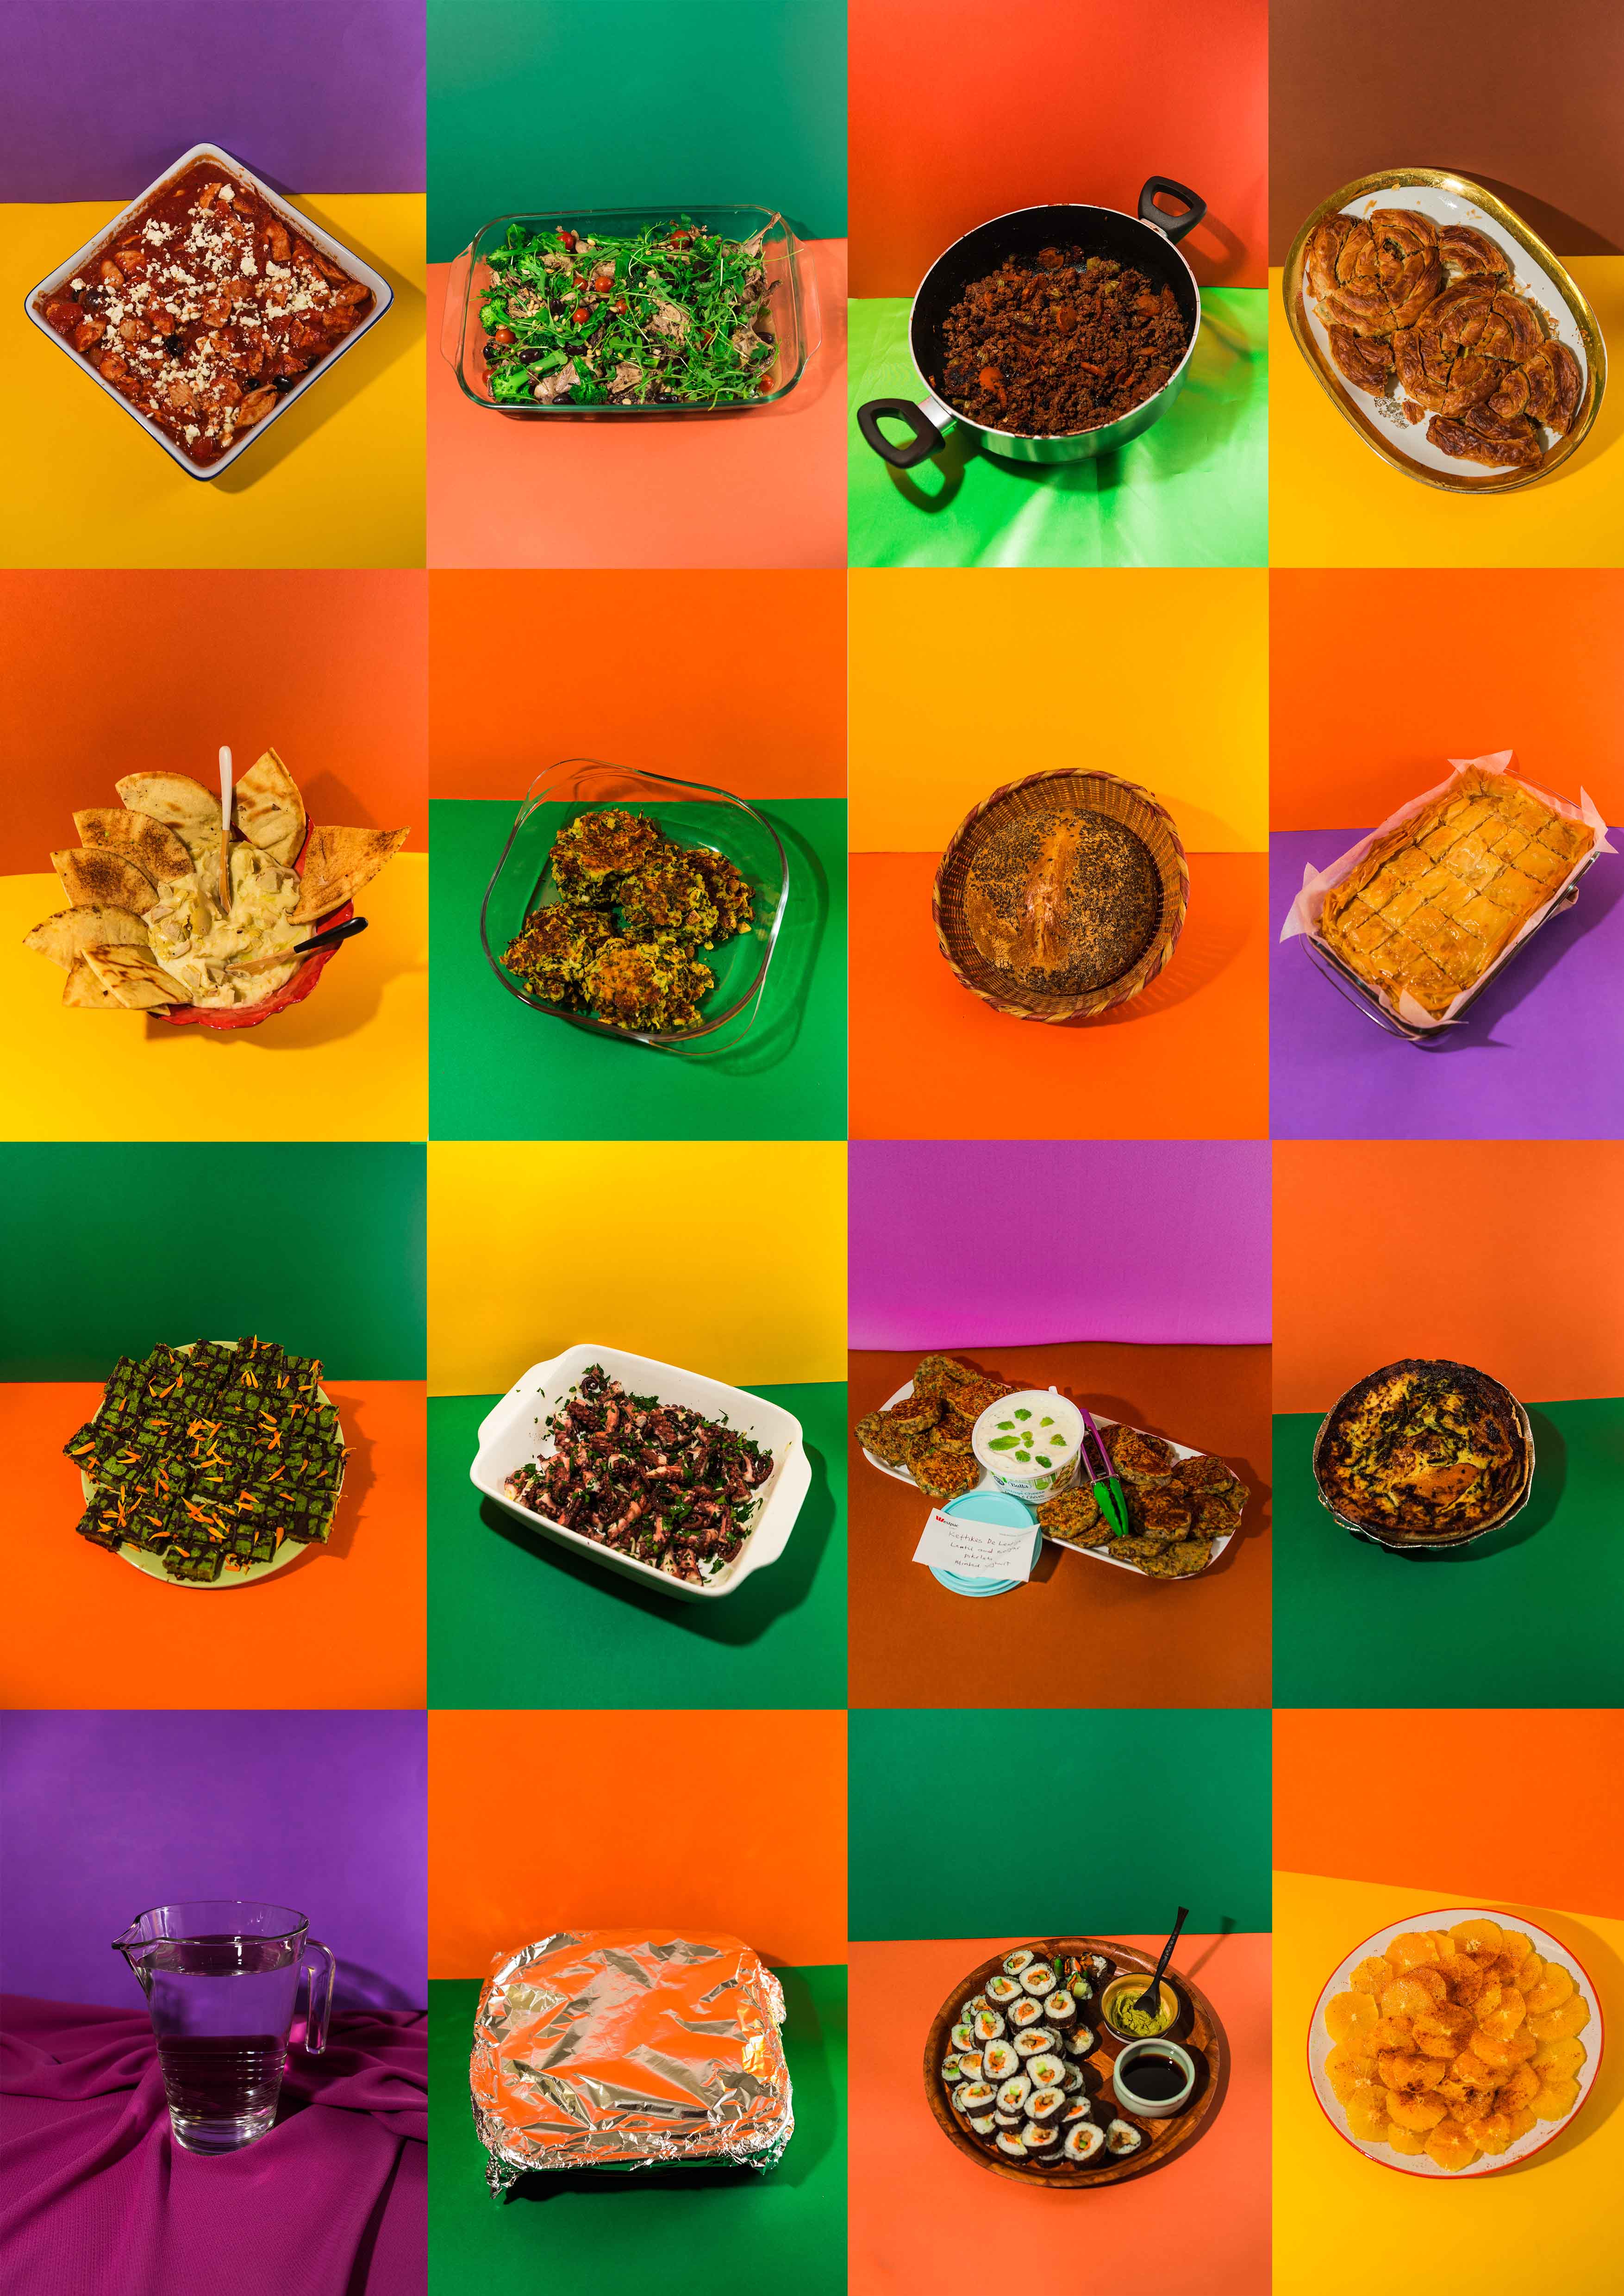 Image 02: 'Residency Food Poster' (2018), photographic print. D.O.P by Emmaline Zanelli. Food cooked by the Ergo Apartment residents. Facilitated by Kaspar Schmidt Mumm.